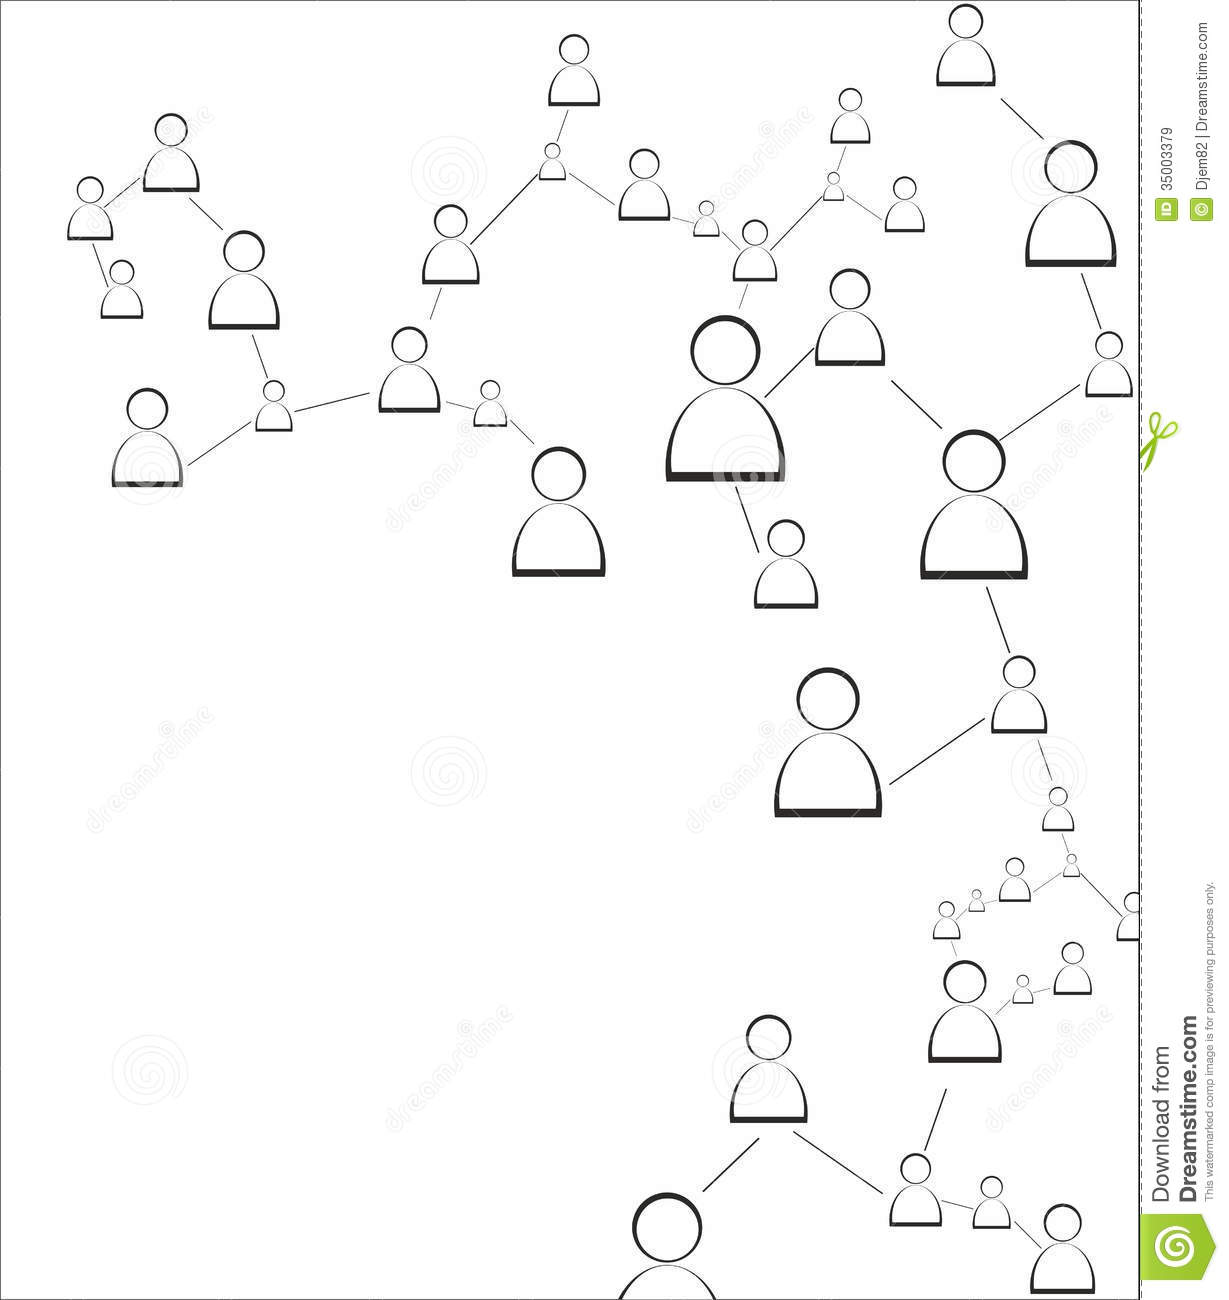 Human Connection On The White Background Vector Illustration